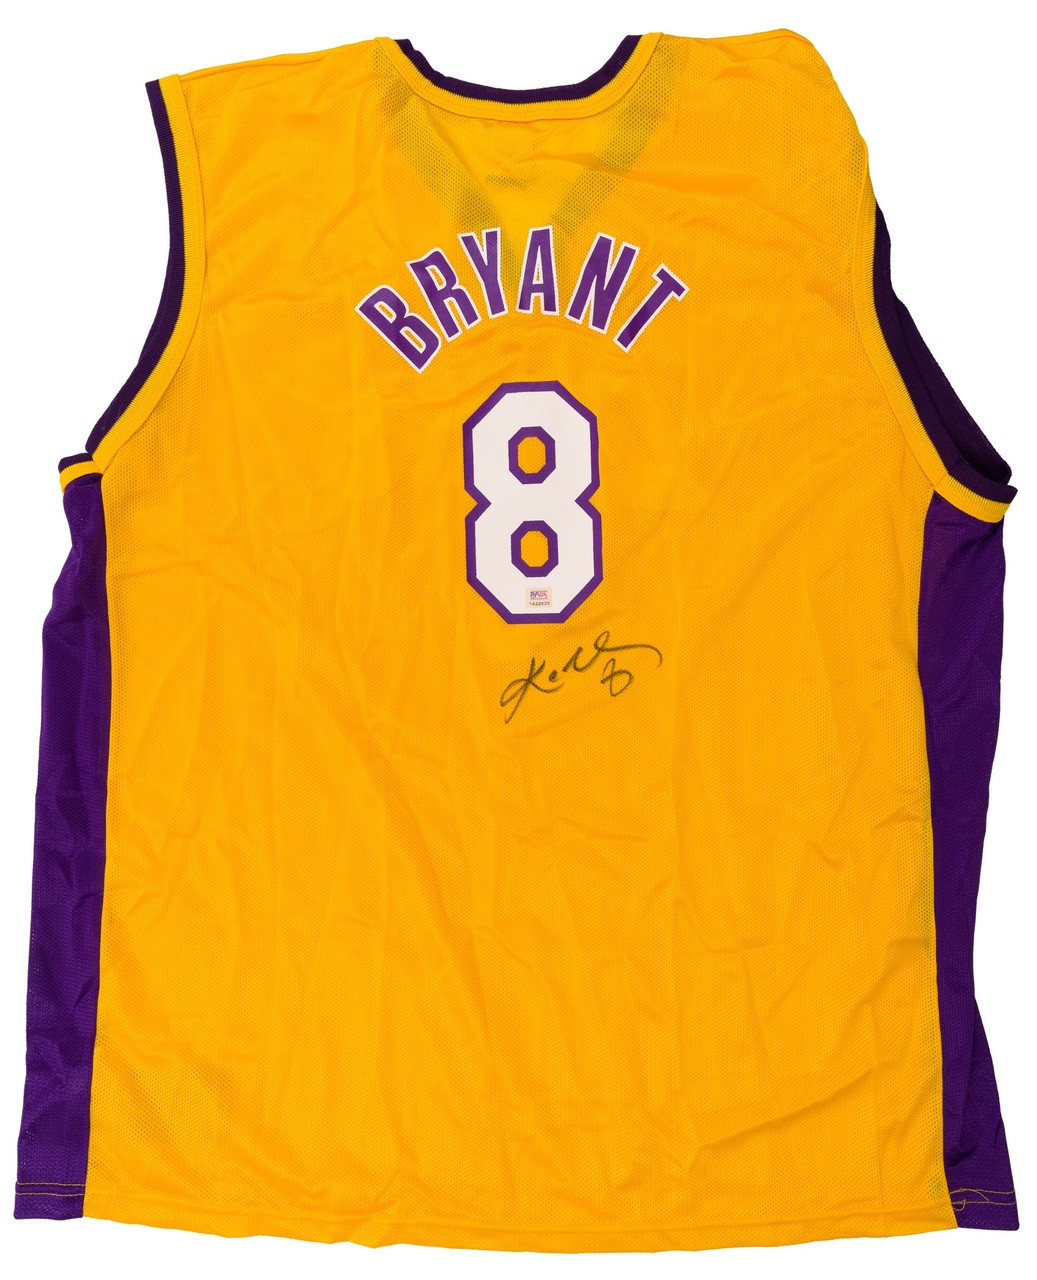 Kobe Bryant Signed Los Angeles Lakers Jersey - PSA/DNA - Cardboard Picasso